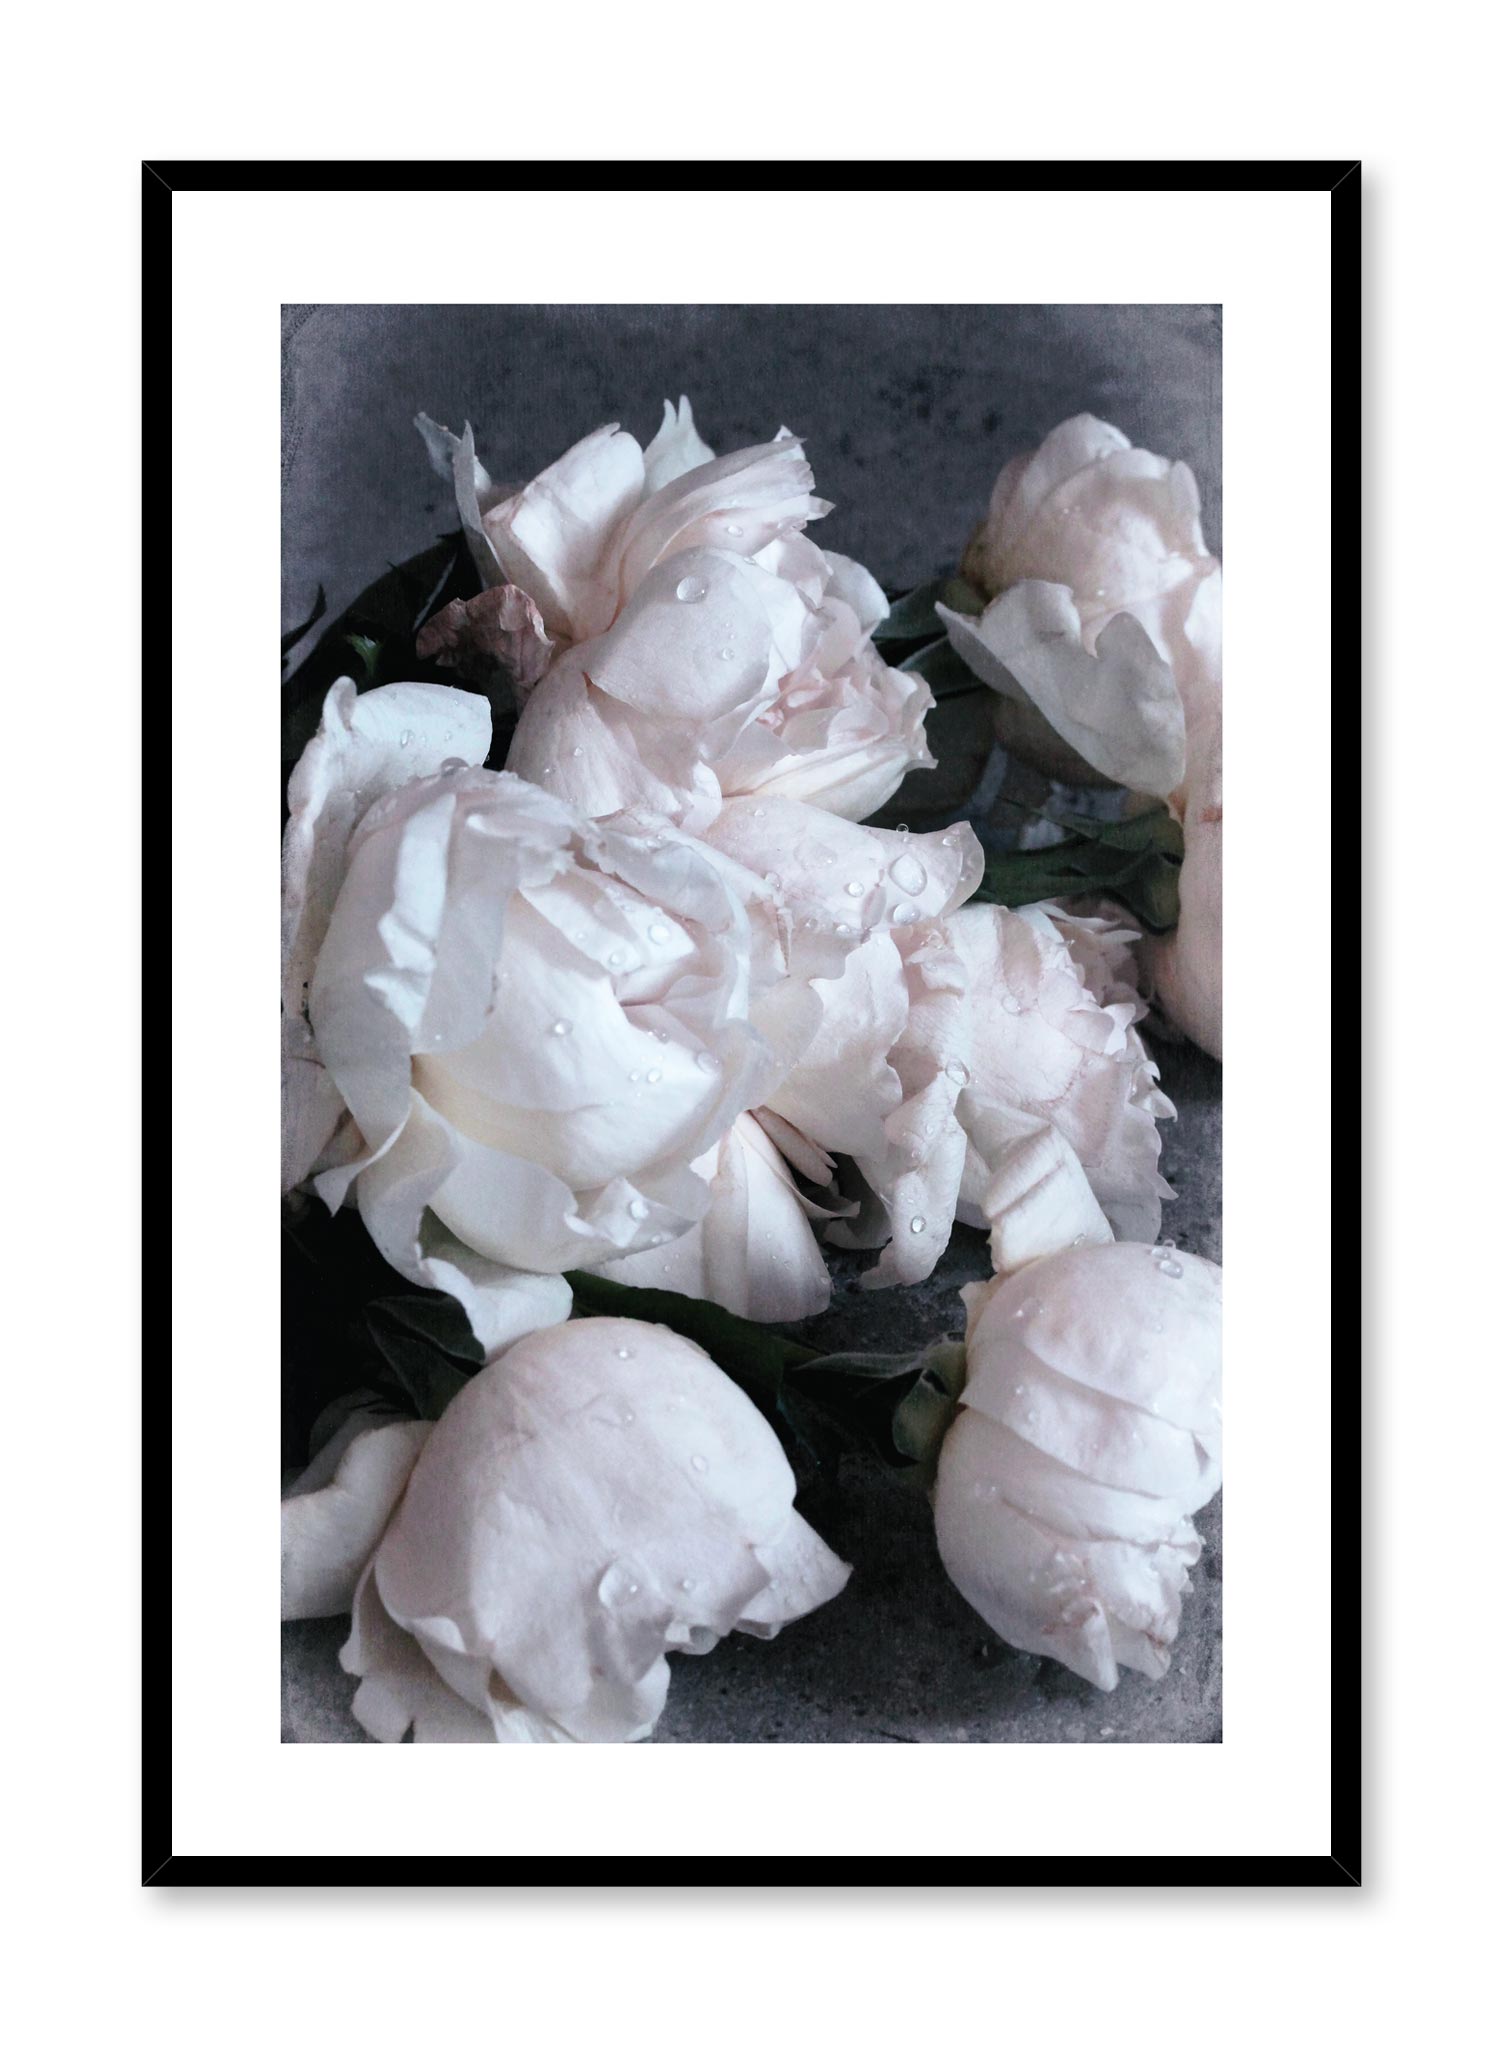 Minimalist design floral photography poster of Roses on Sand by Love Warriors Creative Studio - Buy at Opposite Wall